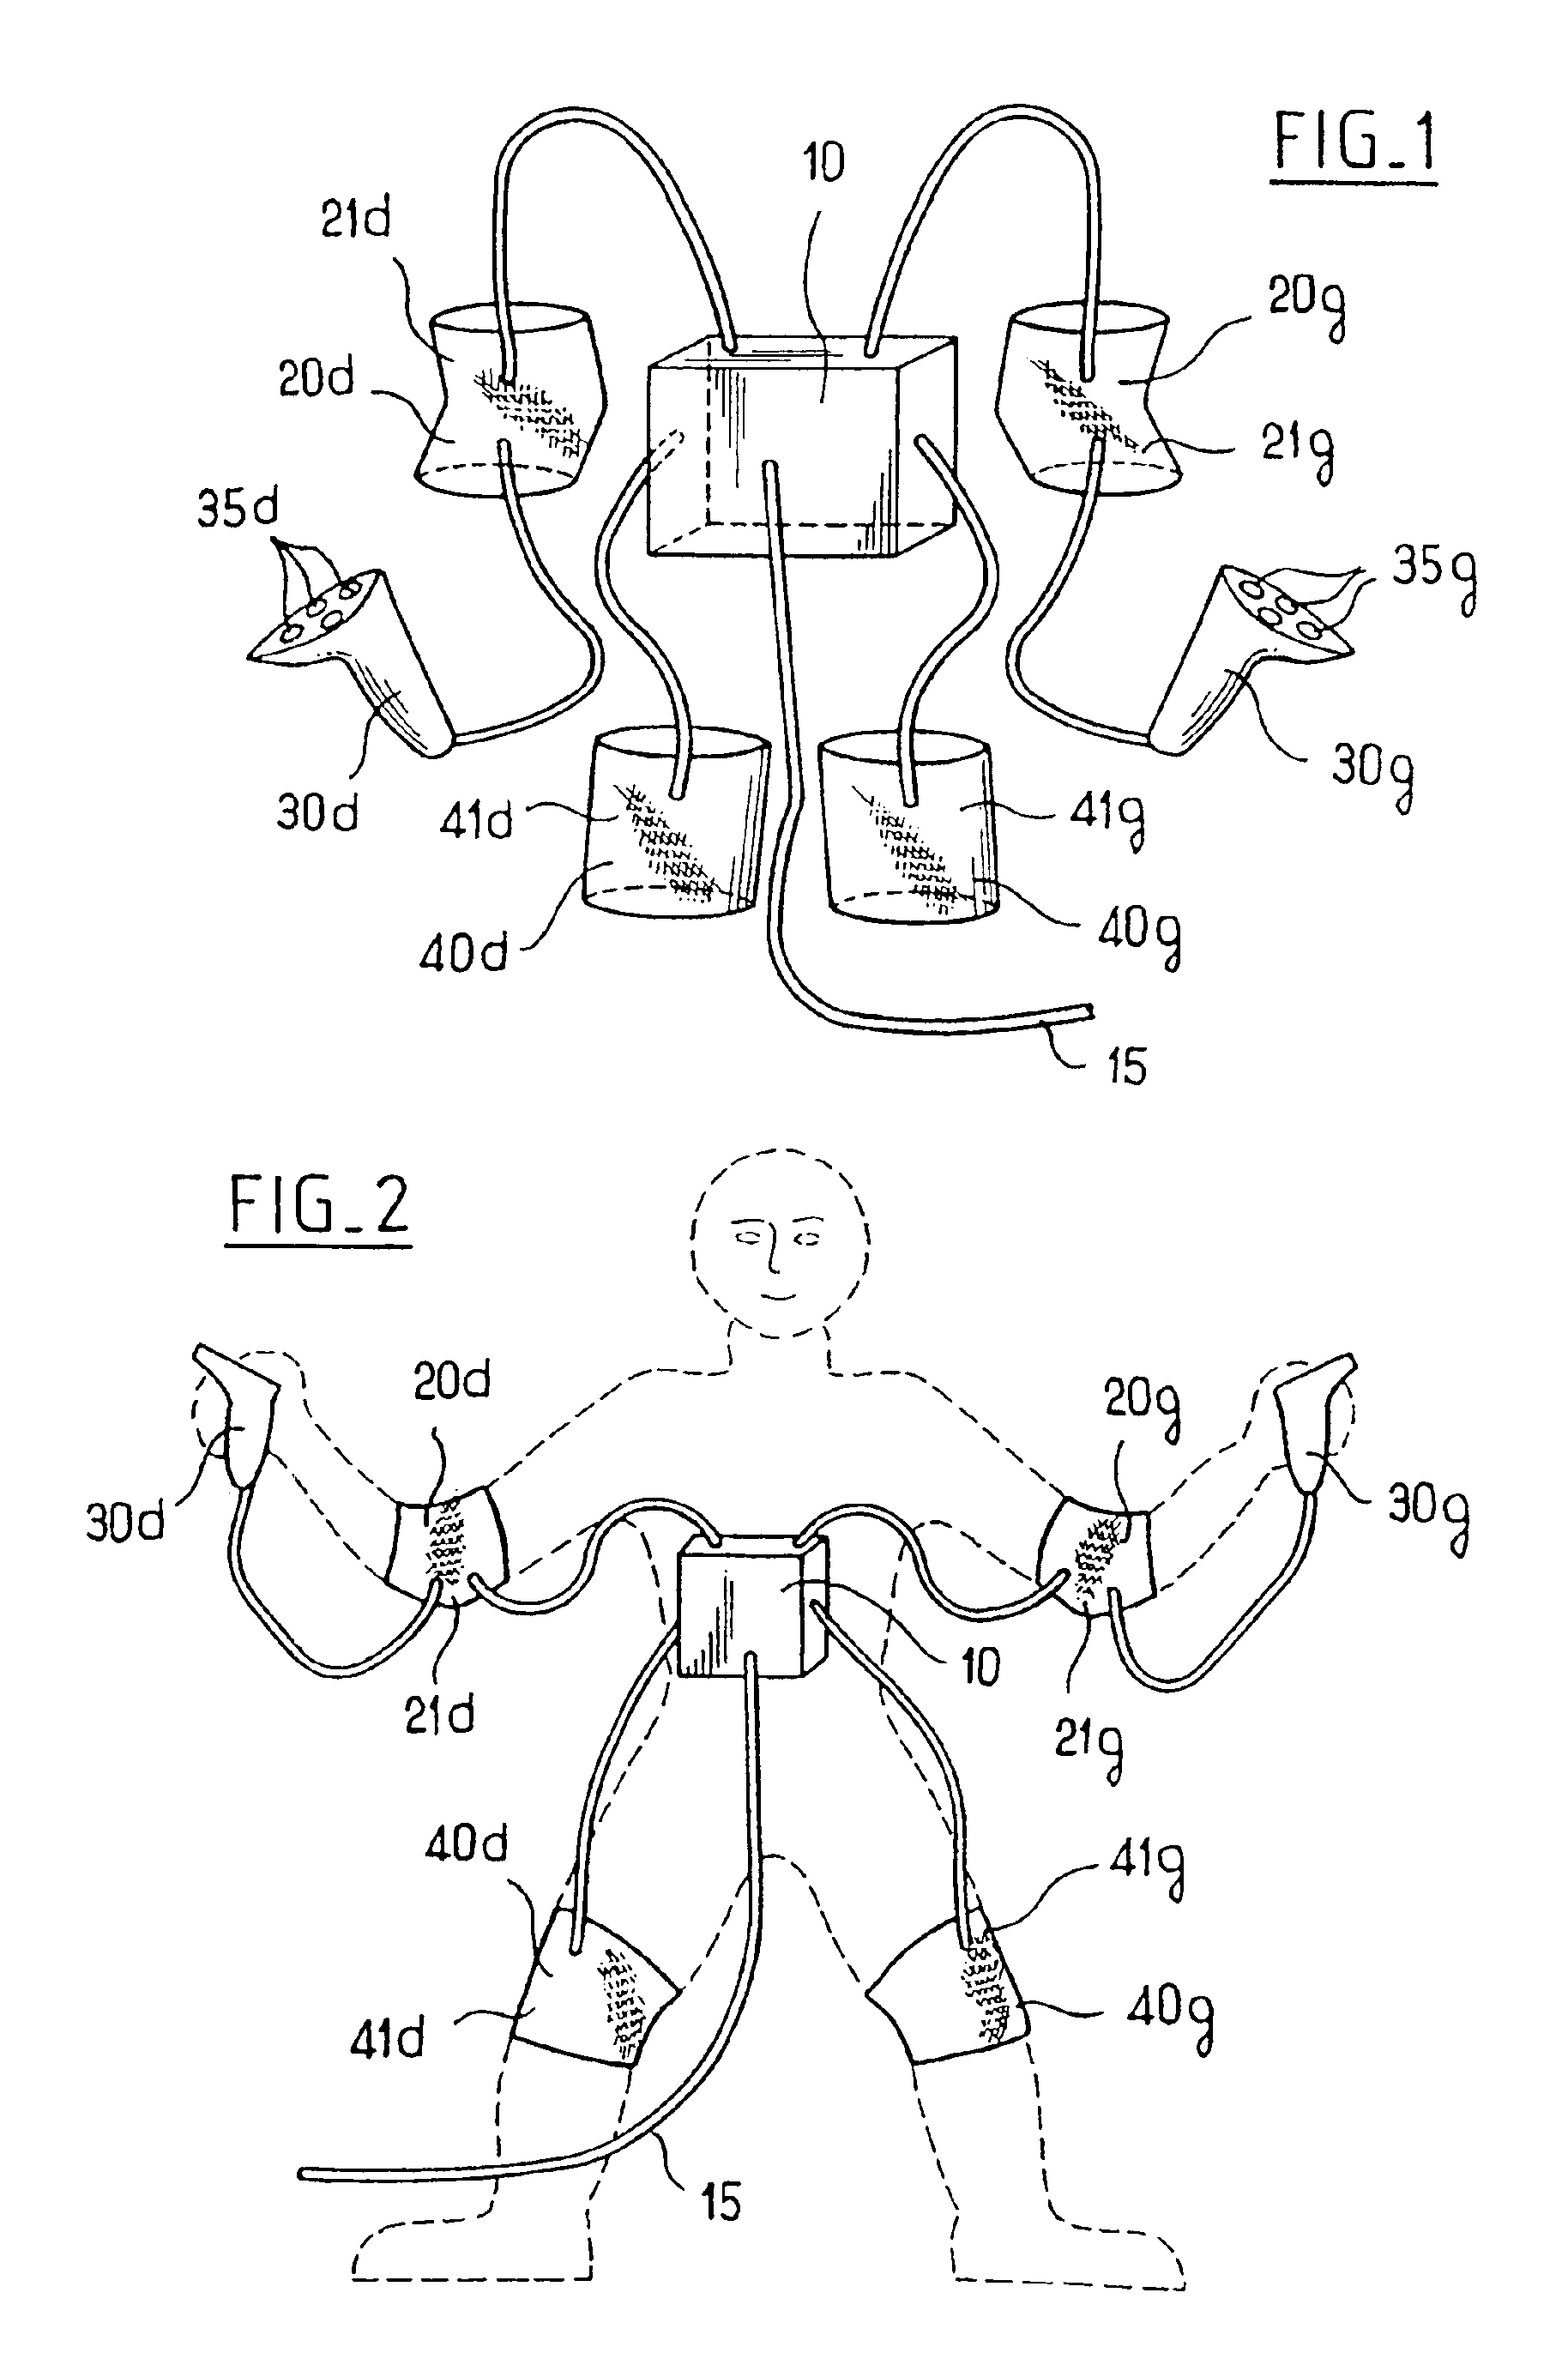 Device indicating movements for software